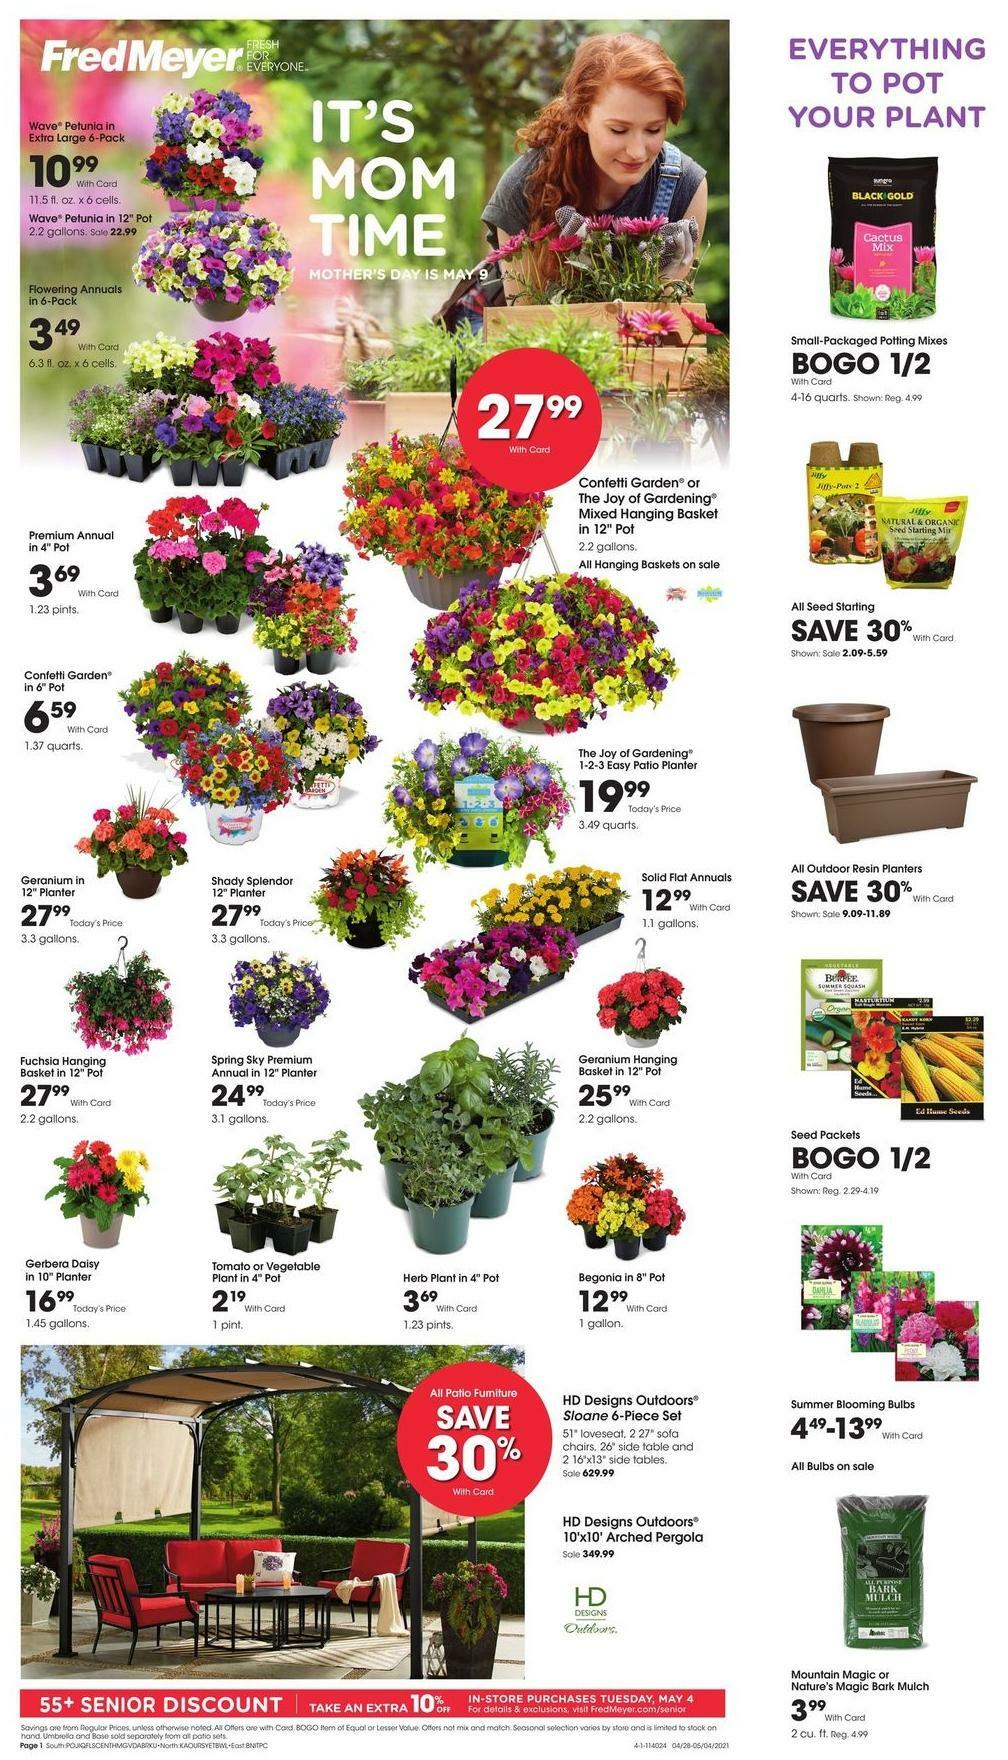 Fred Meyer Garden Weekly Ad & Specials from April 28